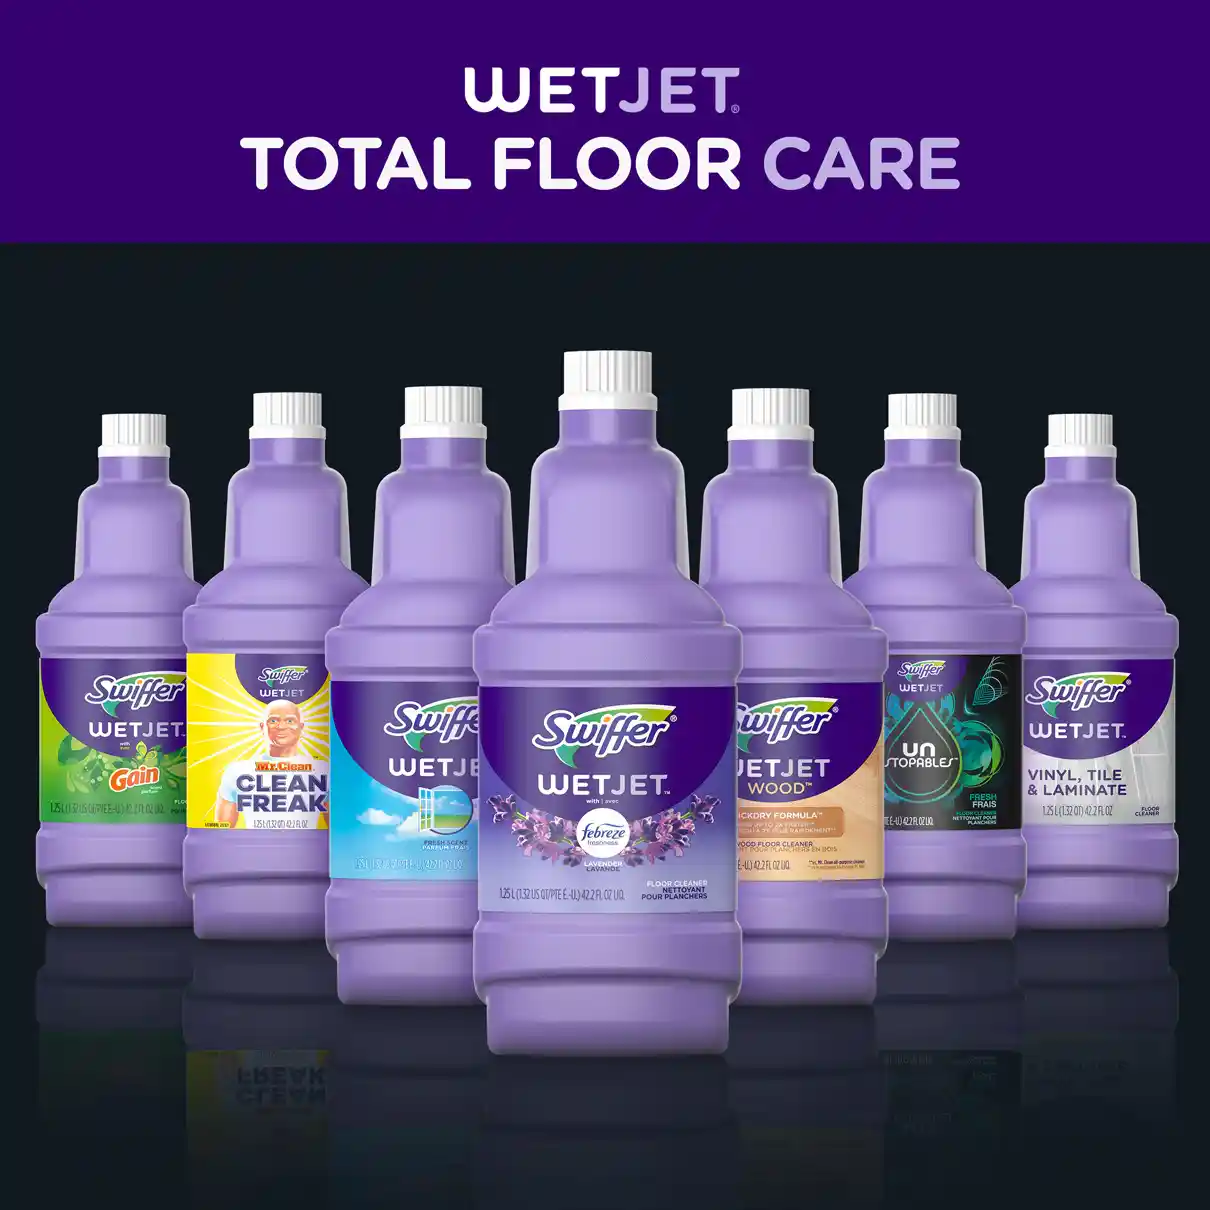 Swiffer WetJet gives a great clean on any floor